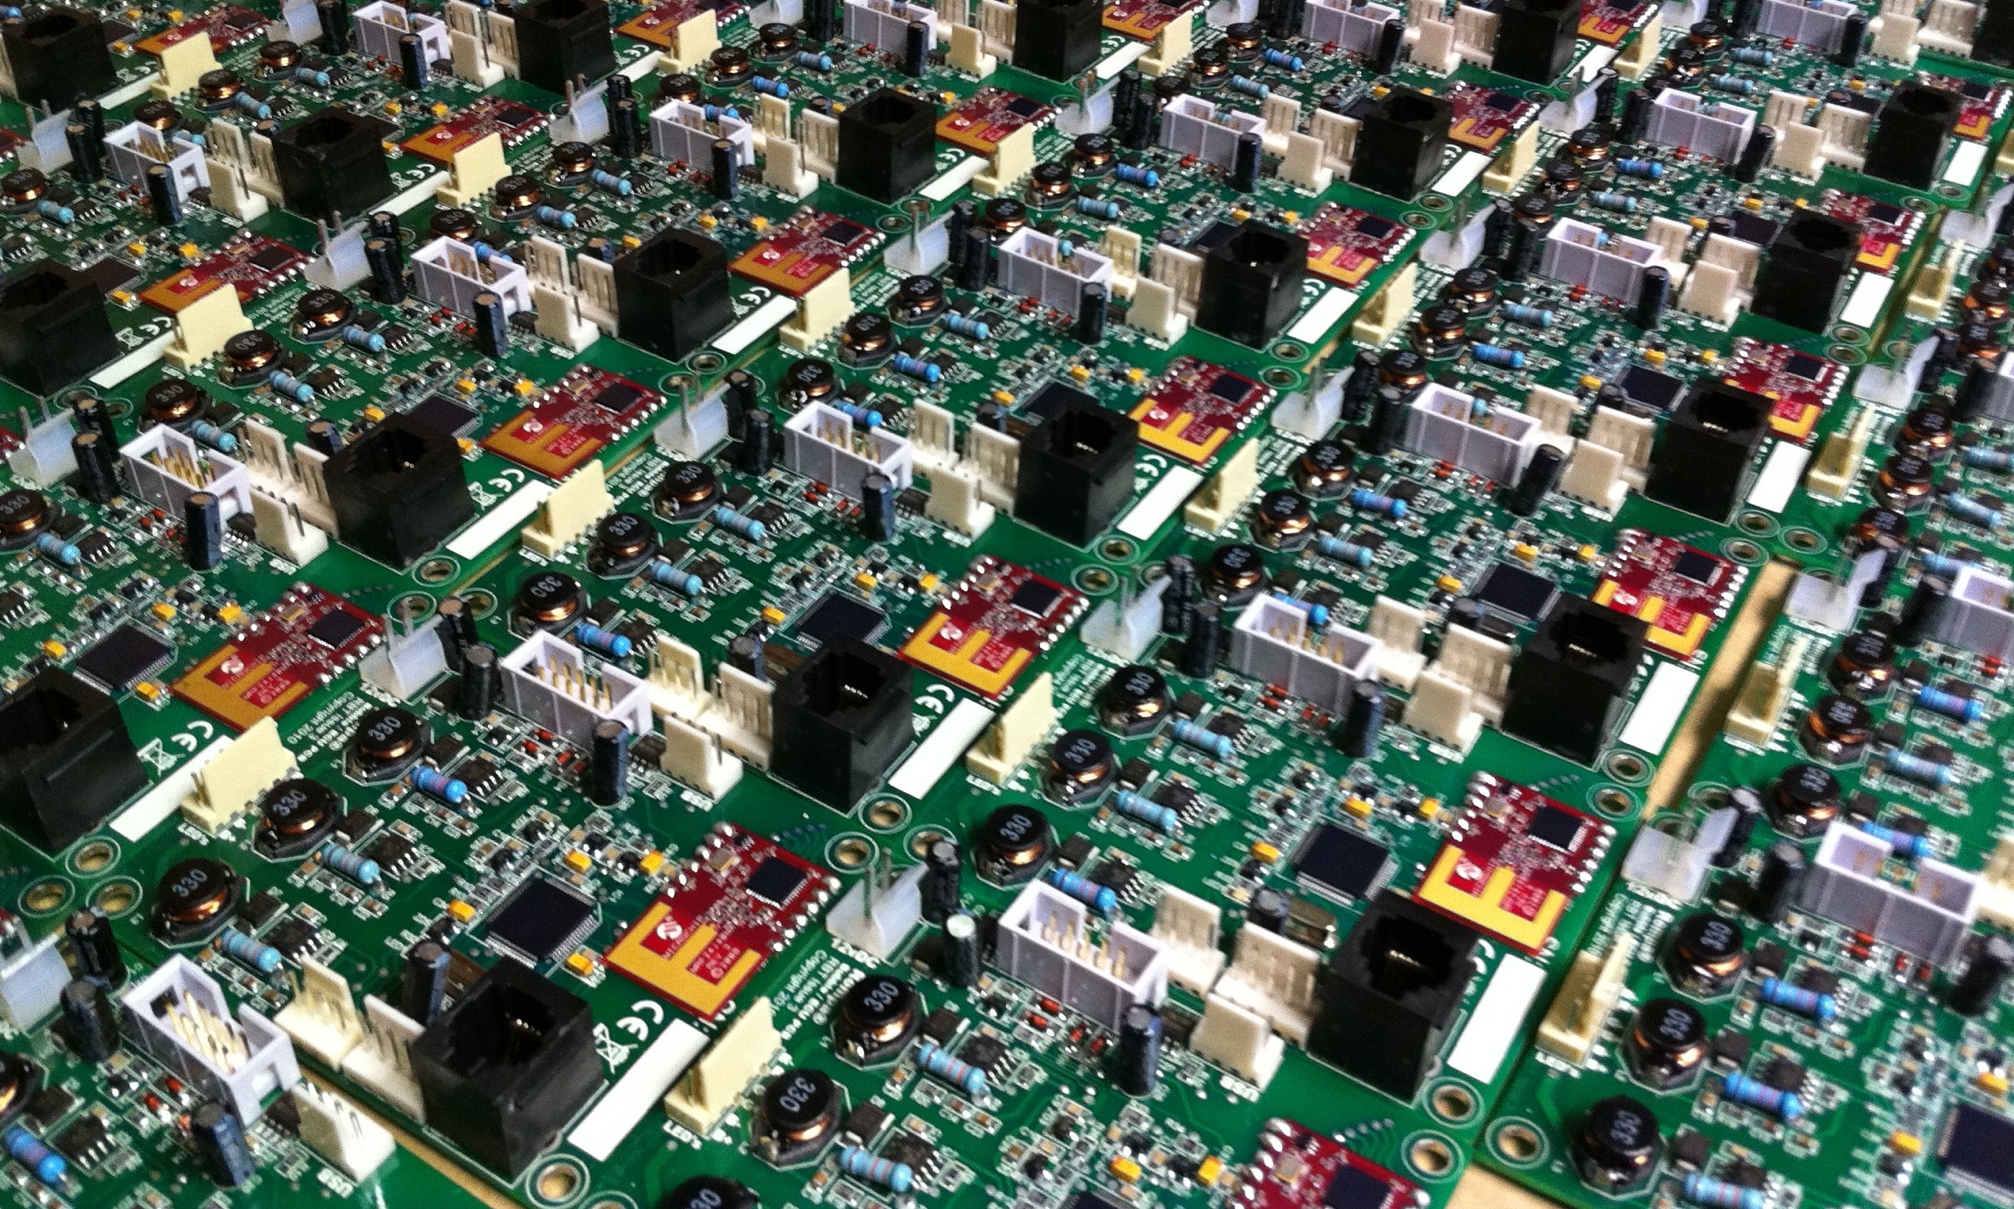 Production line of PCBs